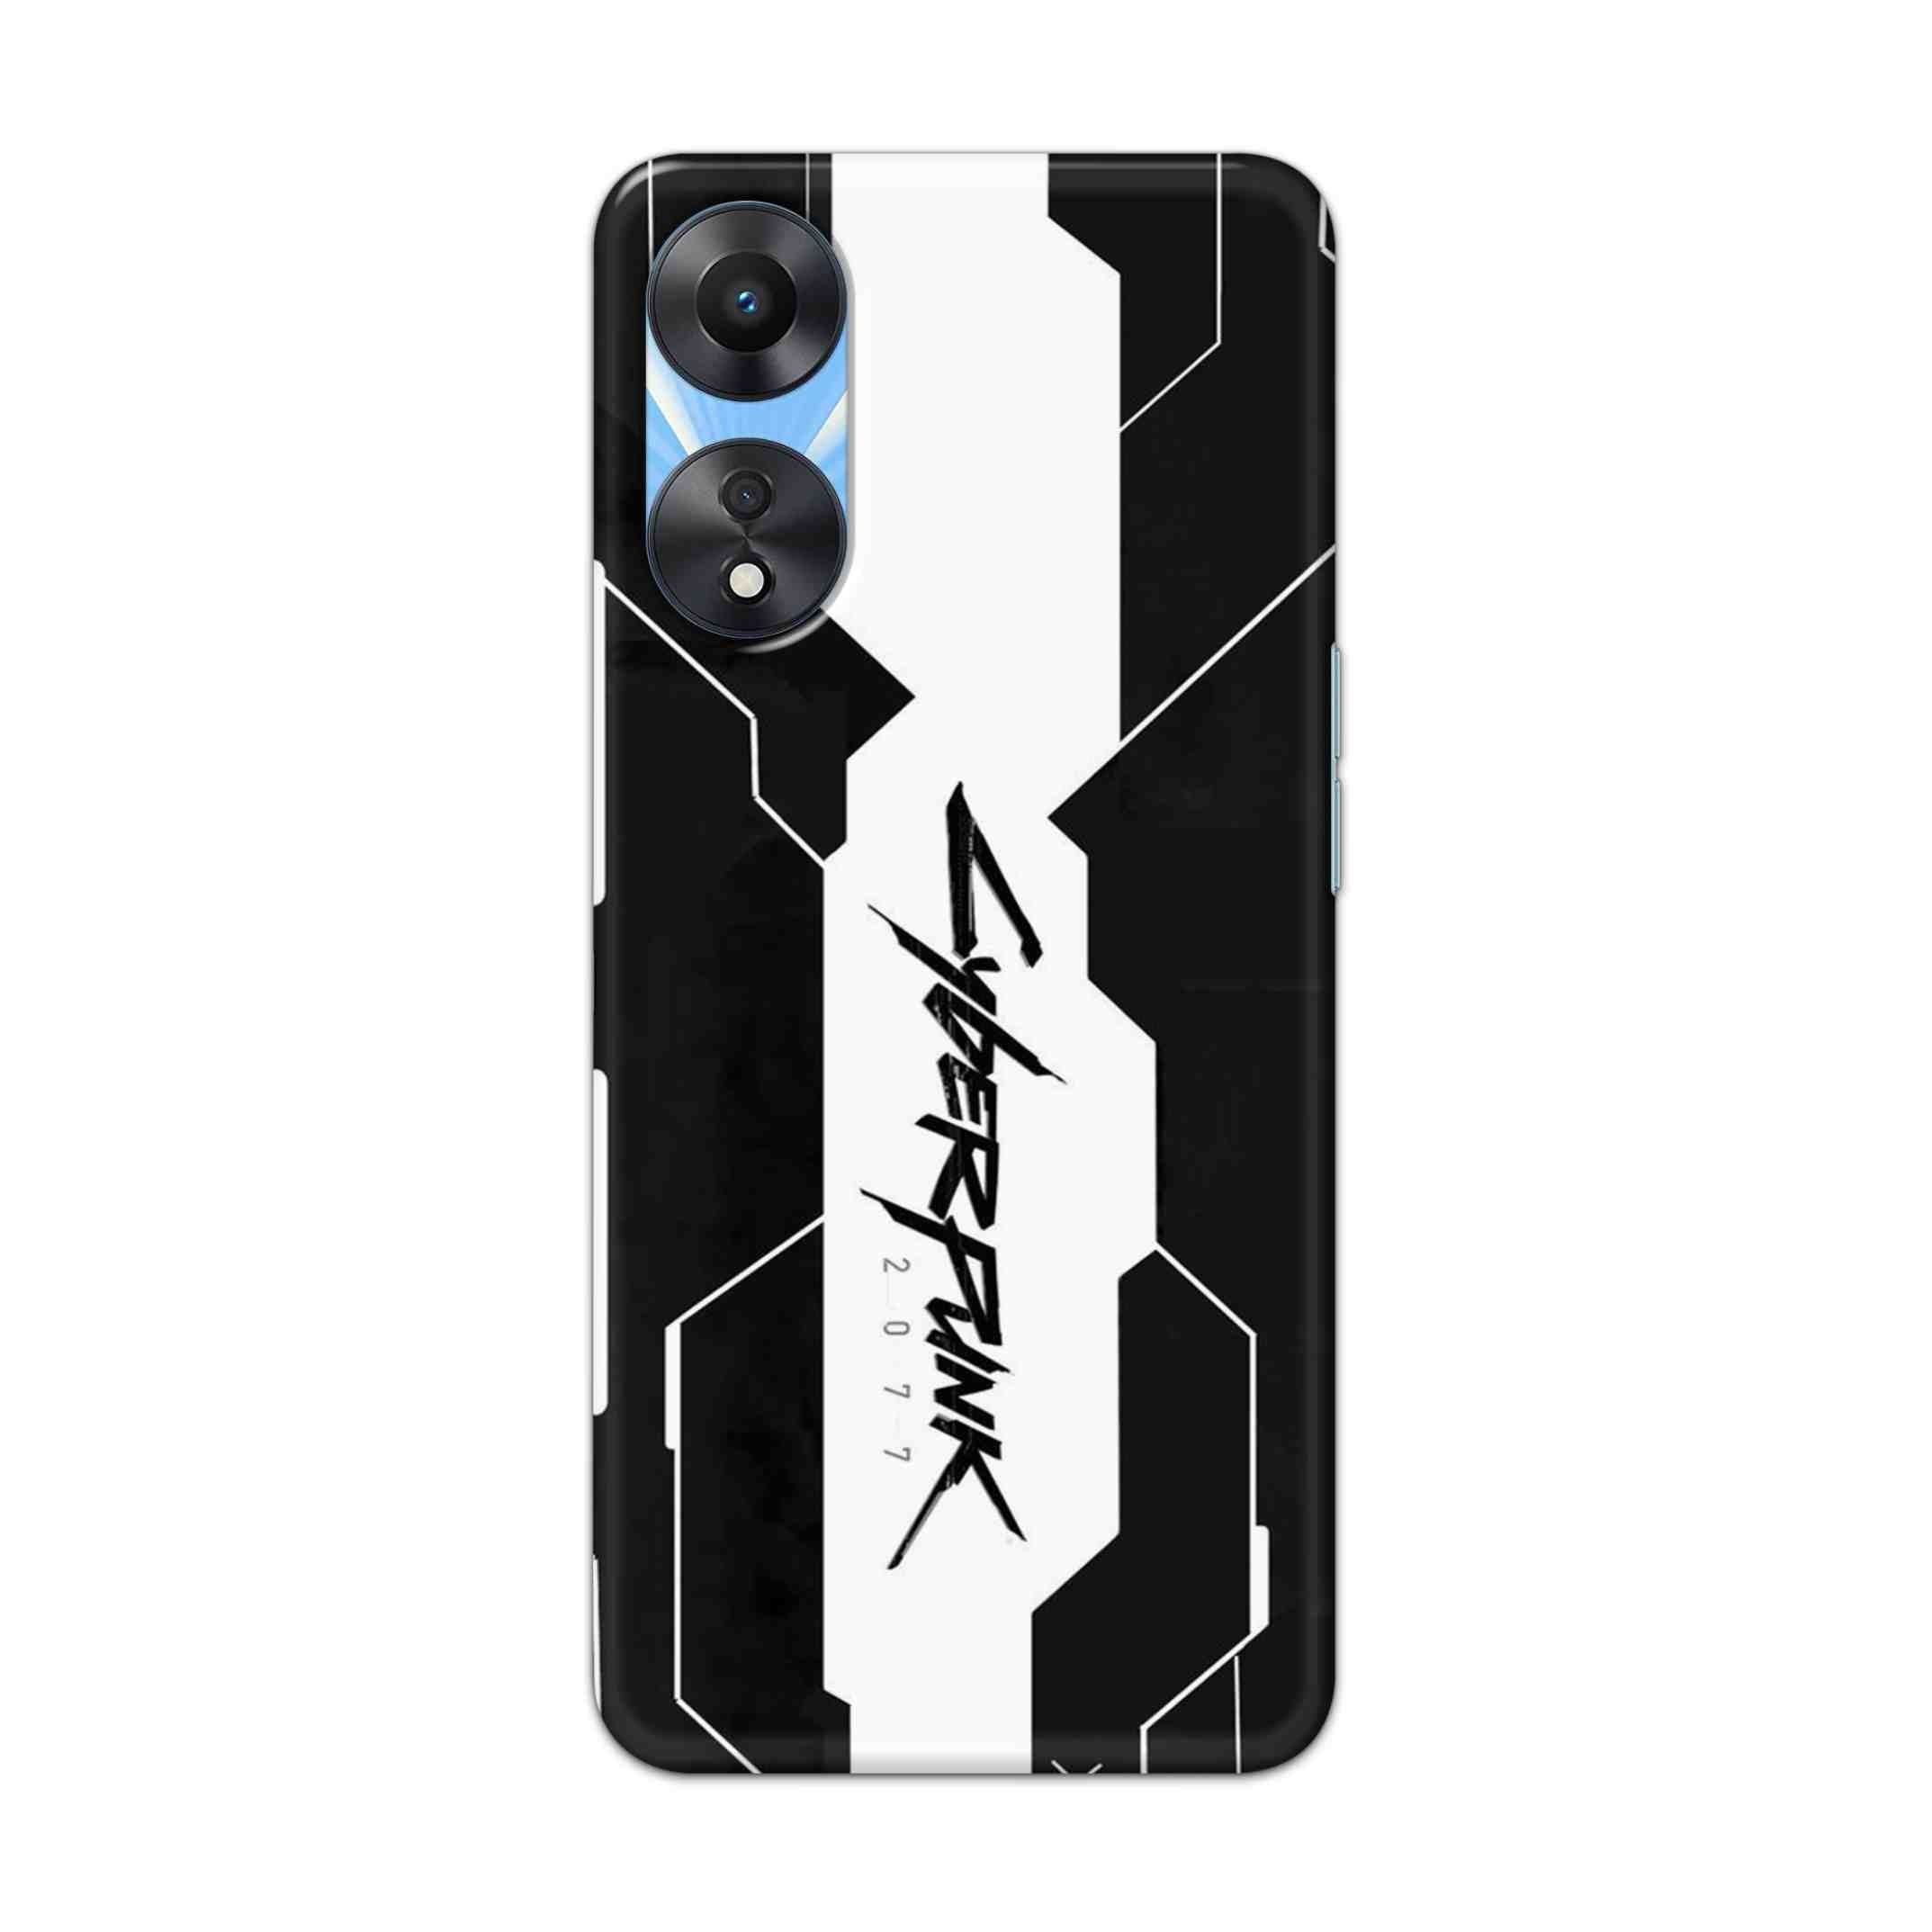 Buy Cyberpunk 2077 Art Hard Back Mobile Phone Case Cover For OPPO A78 Online